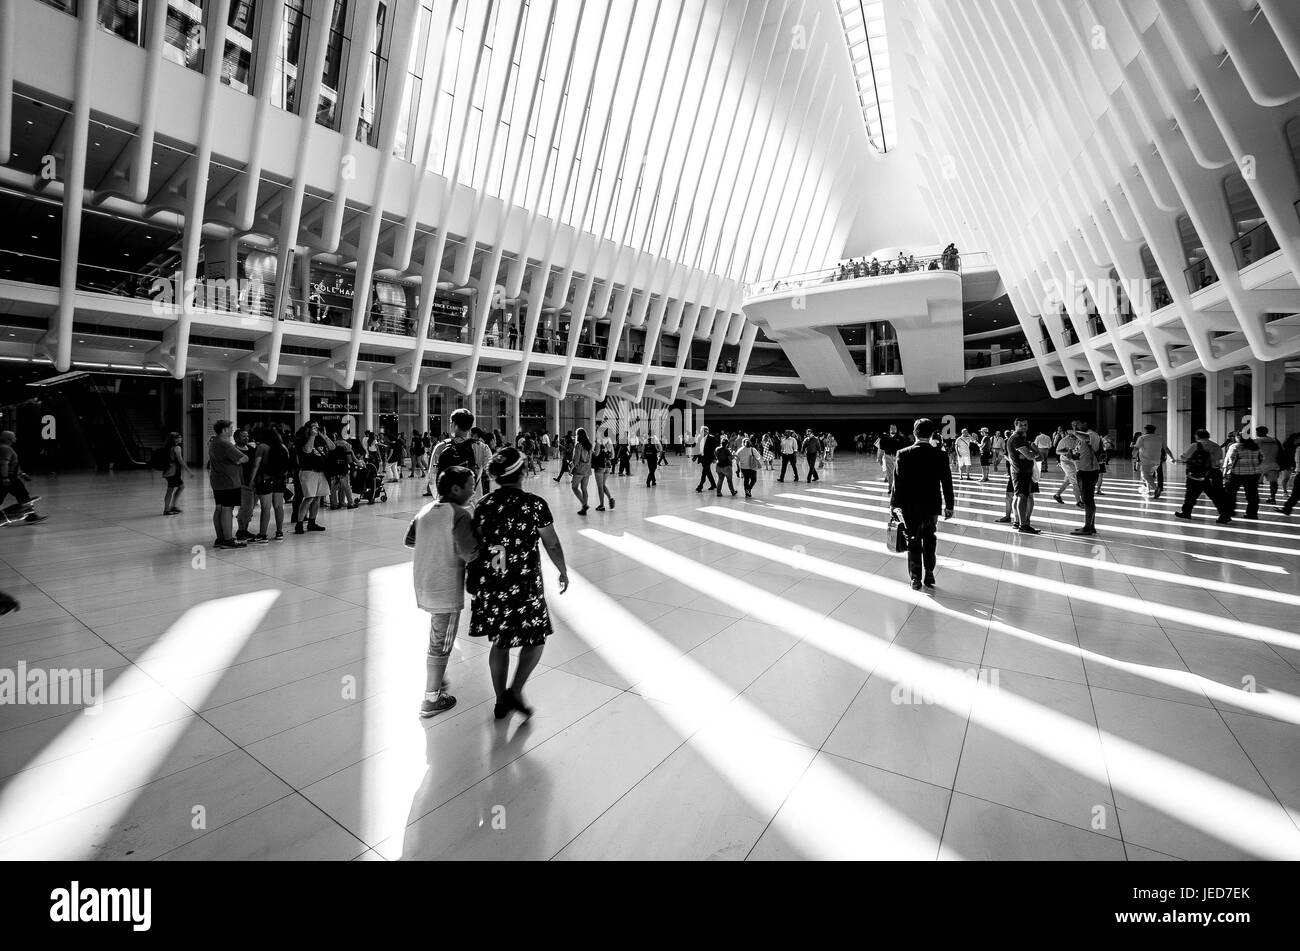 New York City, New York, USA. 24th Aug, 2016. The Oculus, the common name of the structure that houses the Westfield Stores at the WTC. After the 9/11 attacks, the WTC shopping mall was closed until 2016. Estimated cost was $4 billion. It also serves as the PATH train entrance. Credit: Sachelle Babbar/ZUMA Wire/Alamy Live News Stock Photo